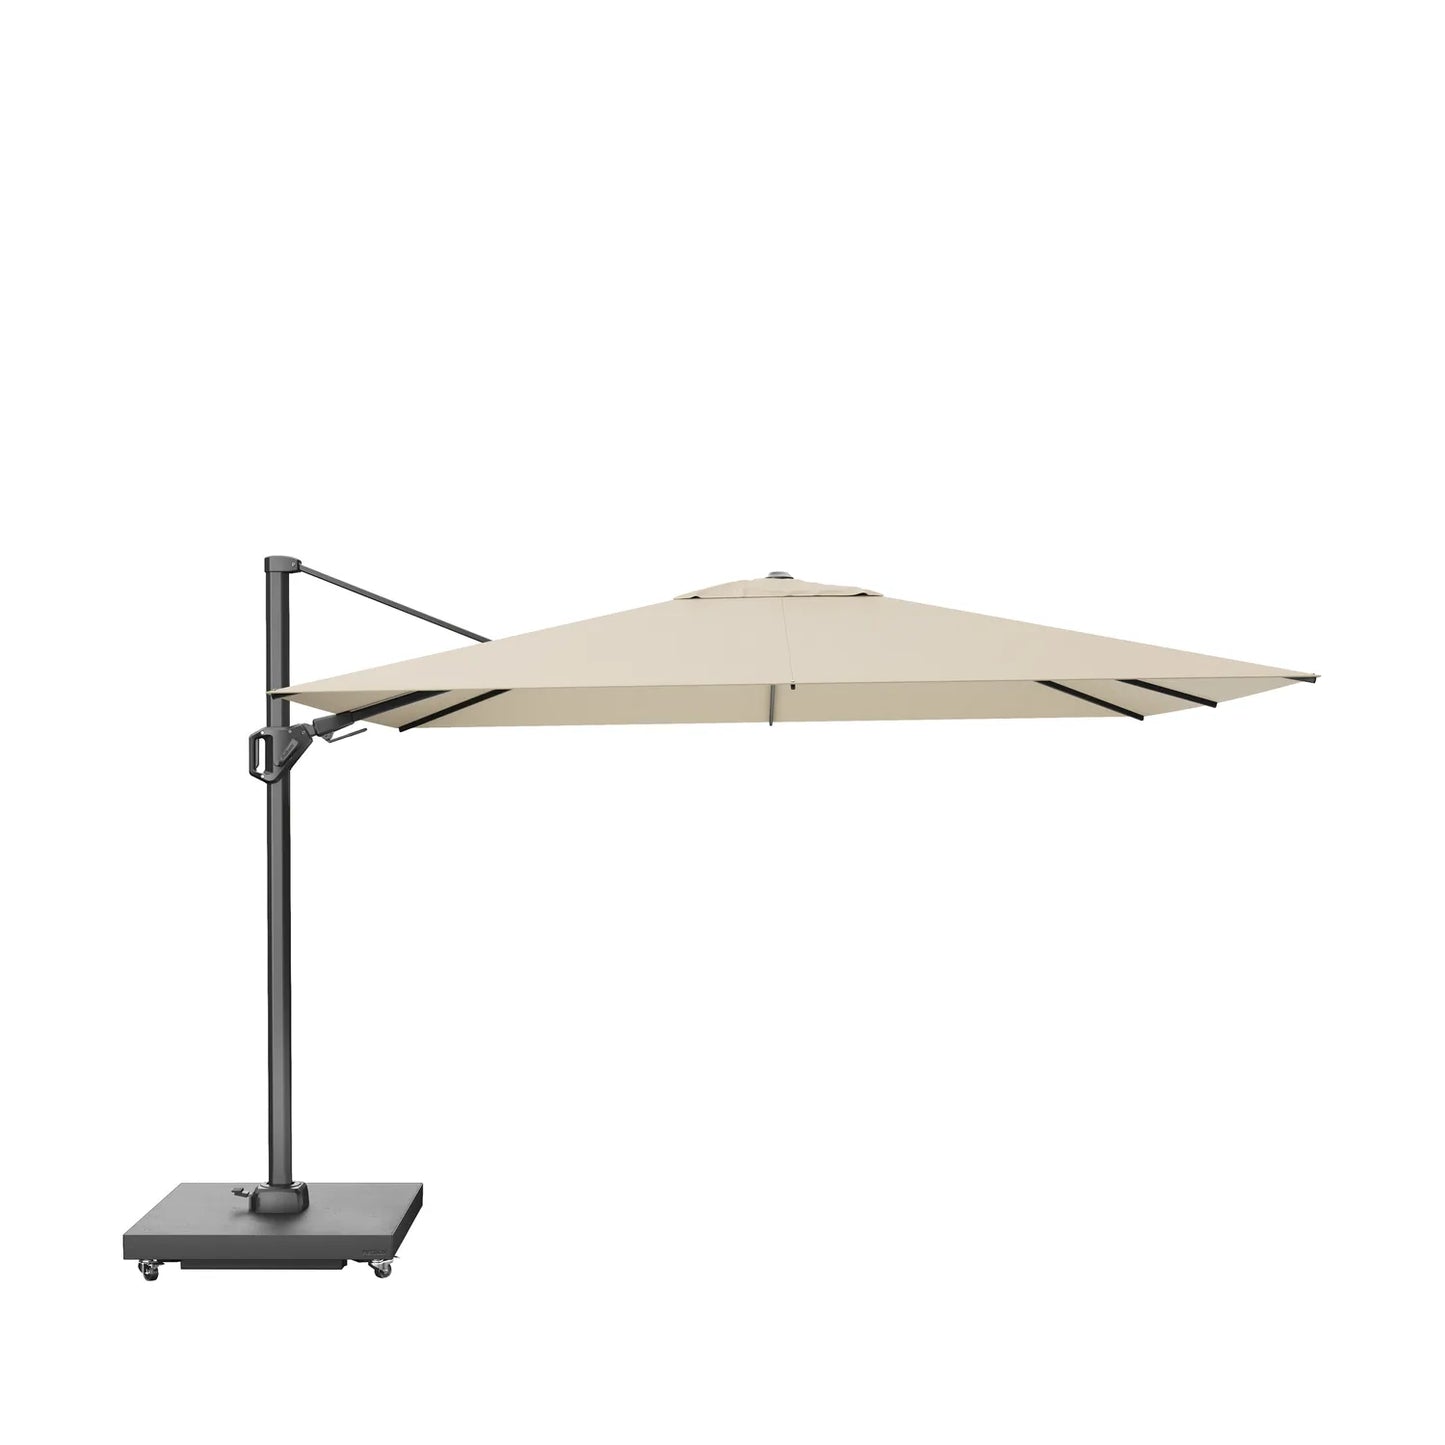 Platinum Challenger T2 3.5x2.6m Oblong Cantilever Parasol in Champagne – Click Style